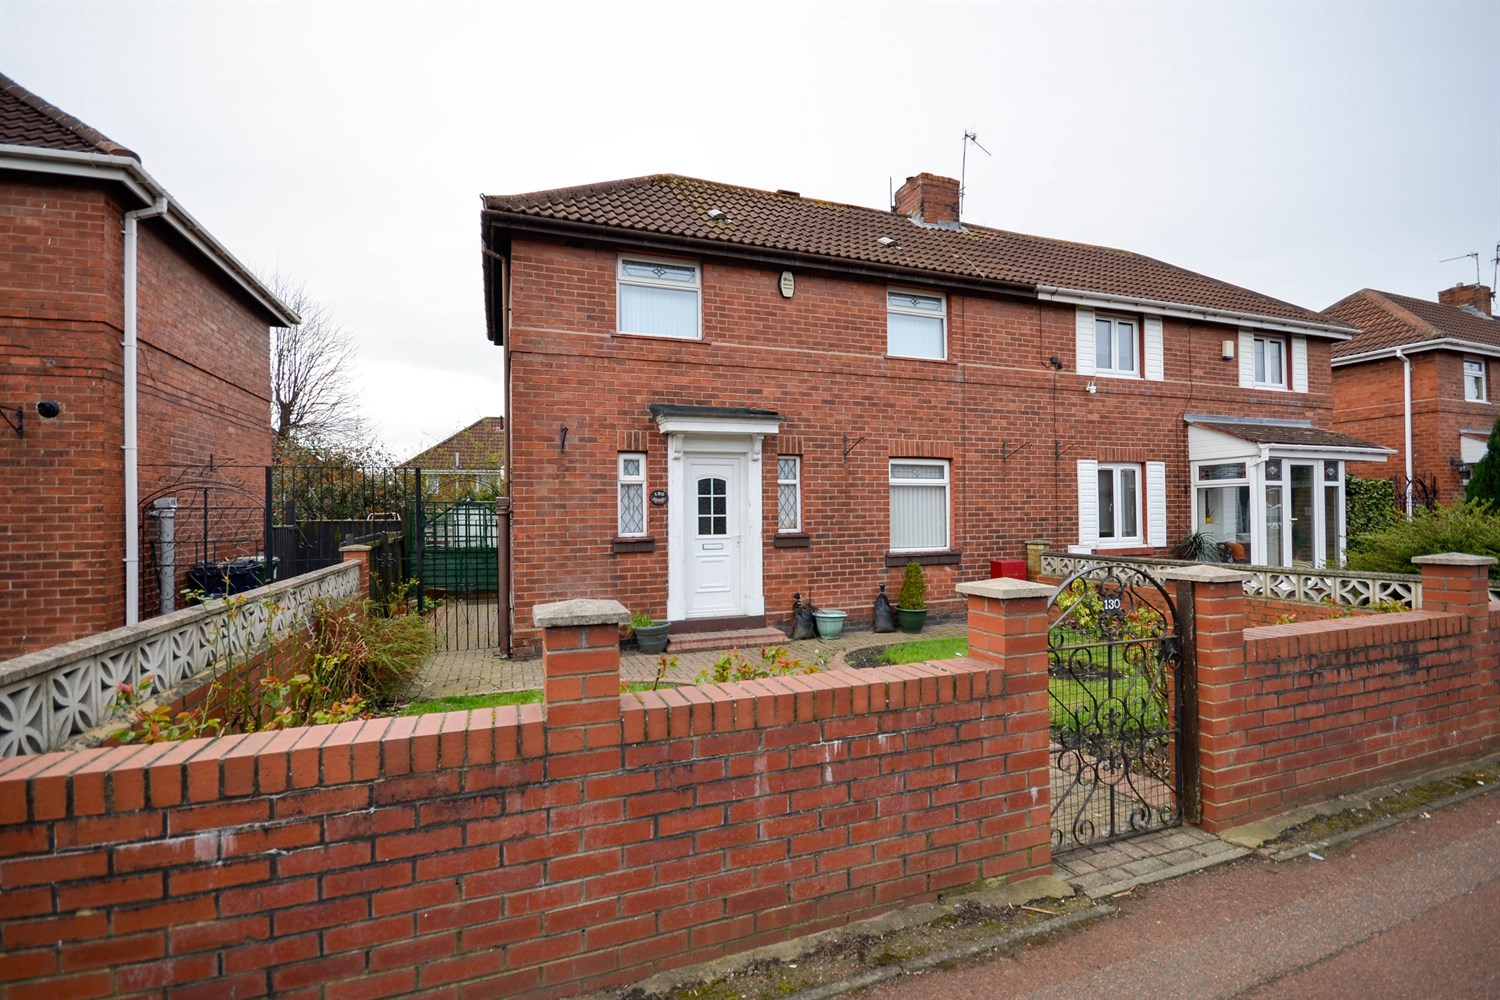 2 bed semi-detached house for sale in Victoria Road, Gateshead - Property Image 1